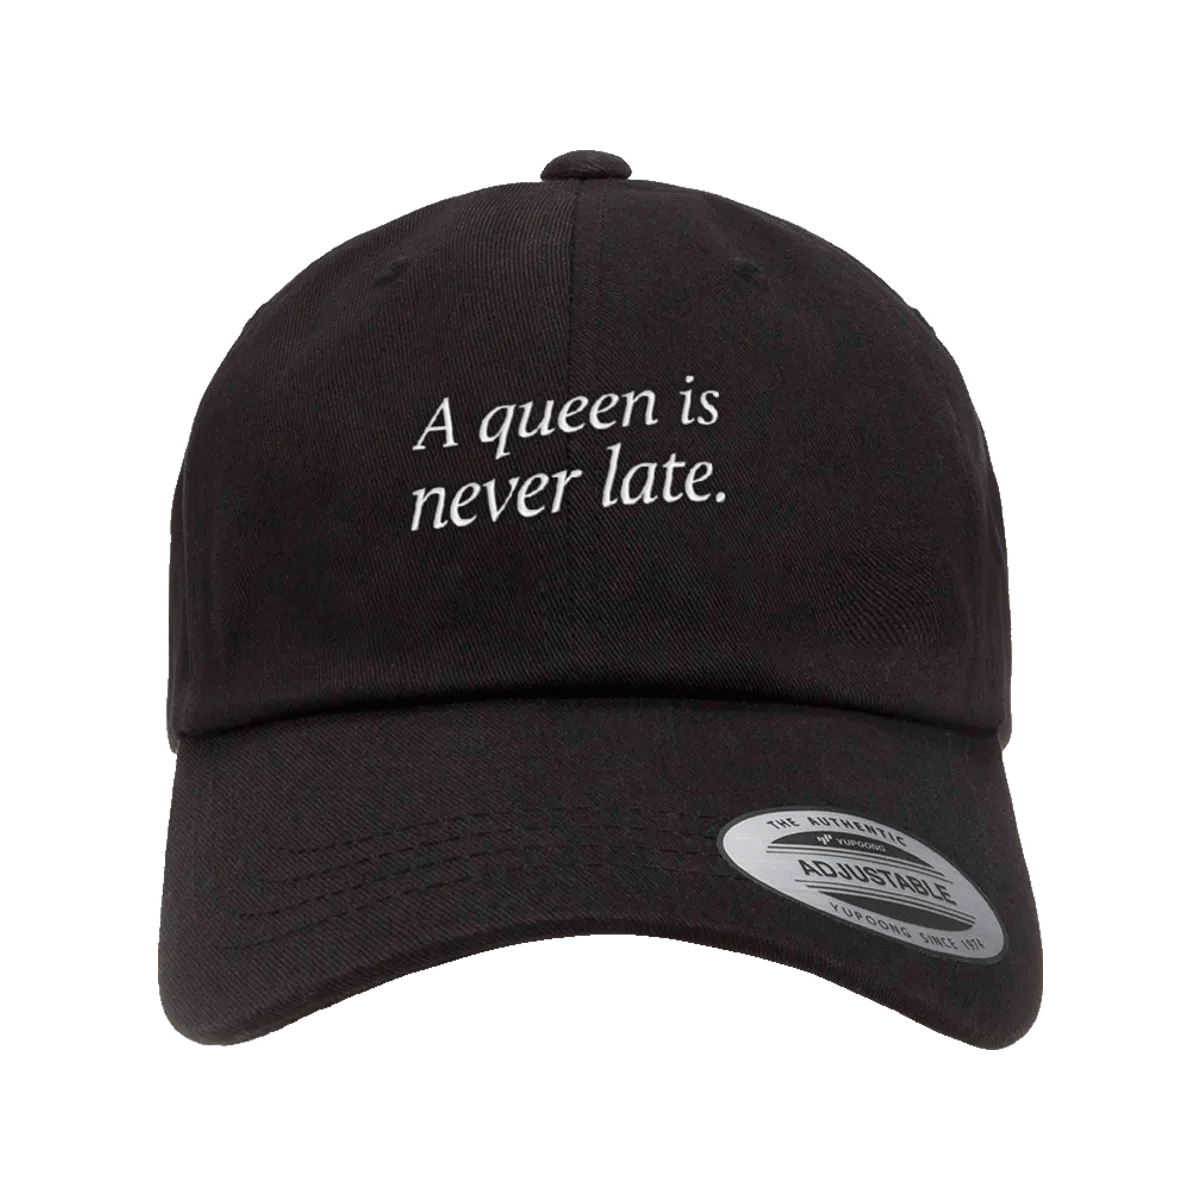 A queen is never late.” graphic dad hat, trucker hat, snapback hat